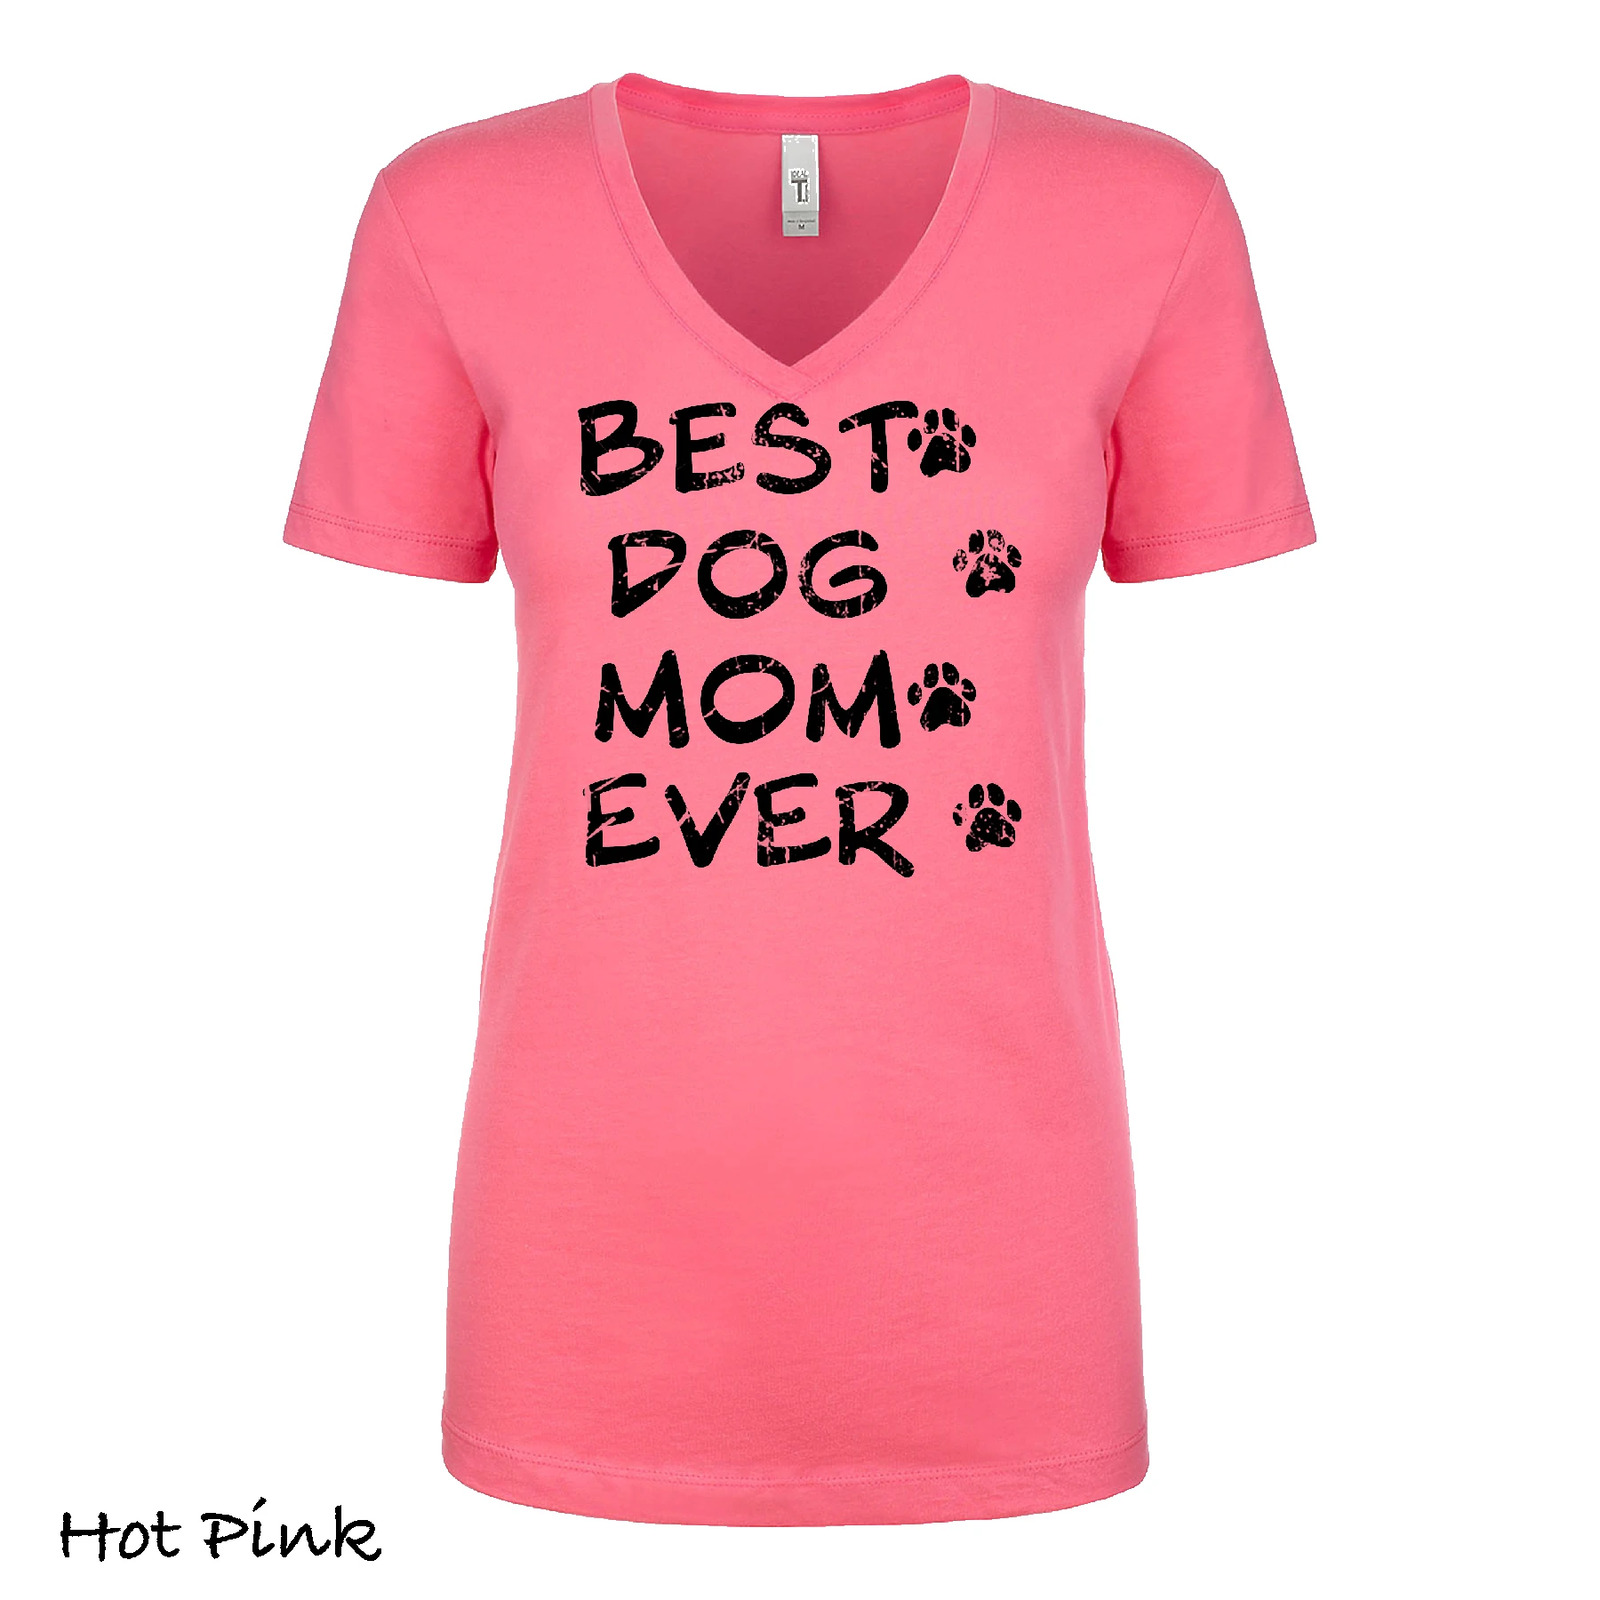 Best Dog Mom Ever V t shirt T-Shirt Funny Parody Tee Shirt Mother's Day Gift Mom